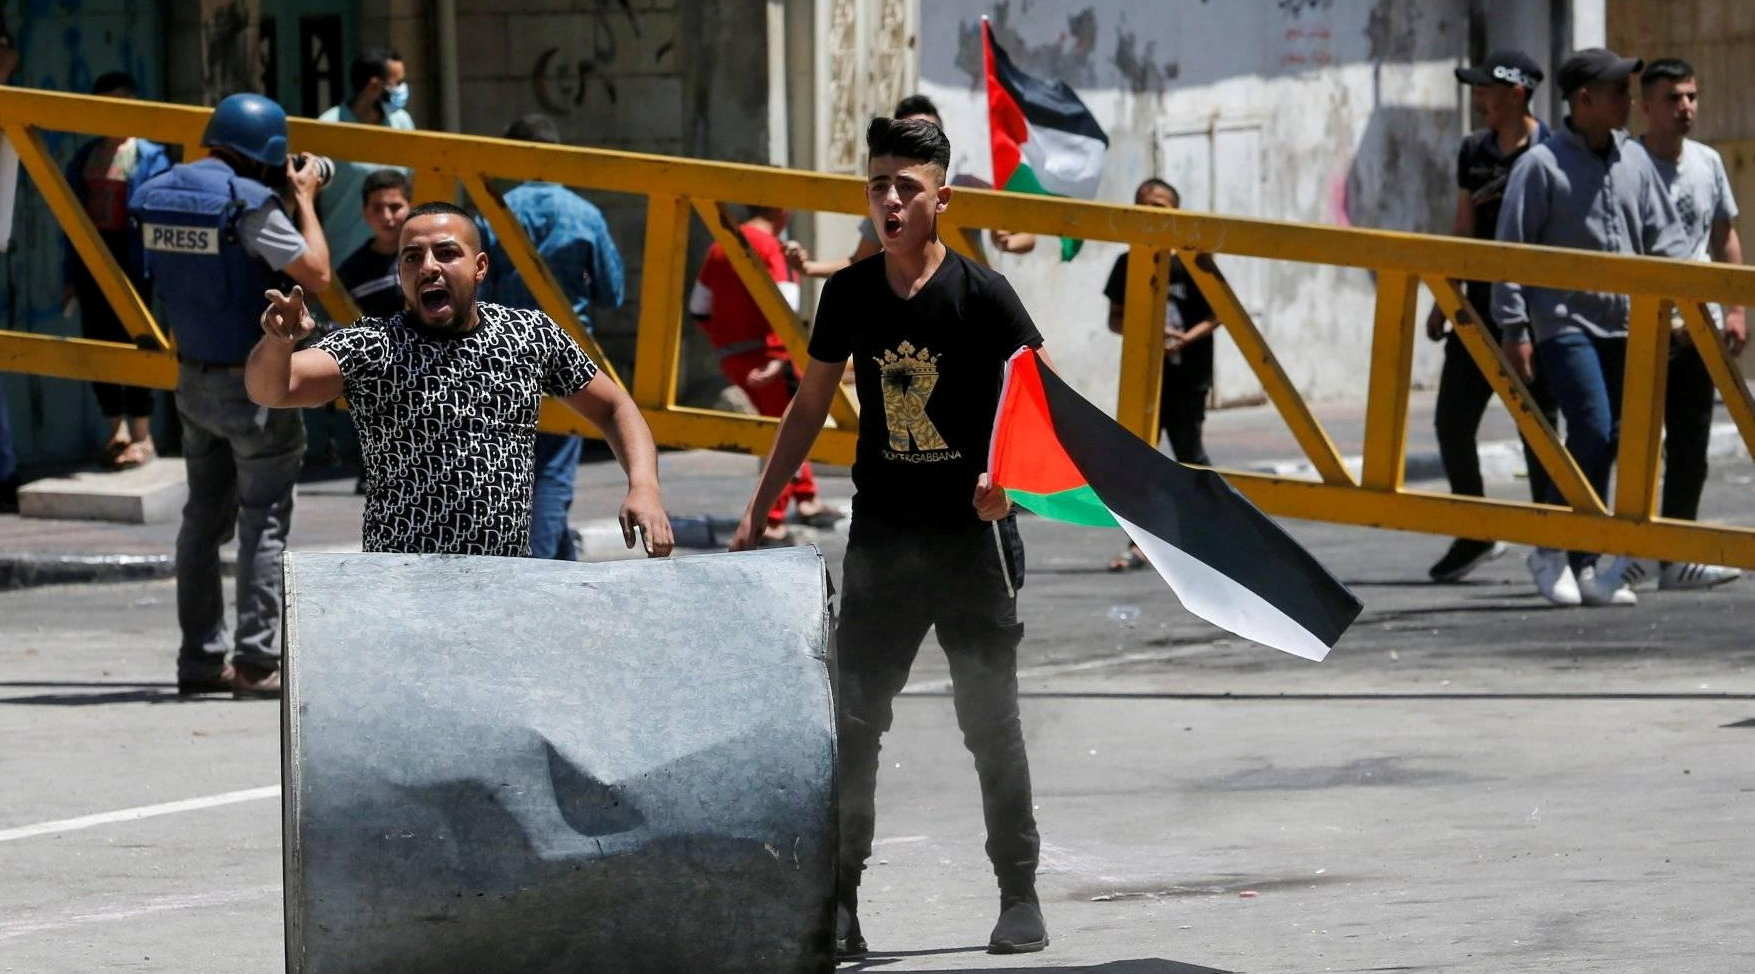 Palestinian demonstrators in the city of Hebron, Friday, May 14